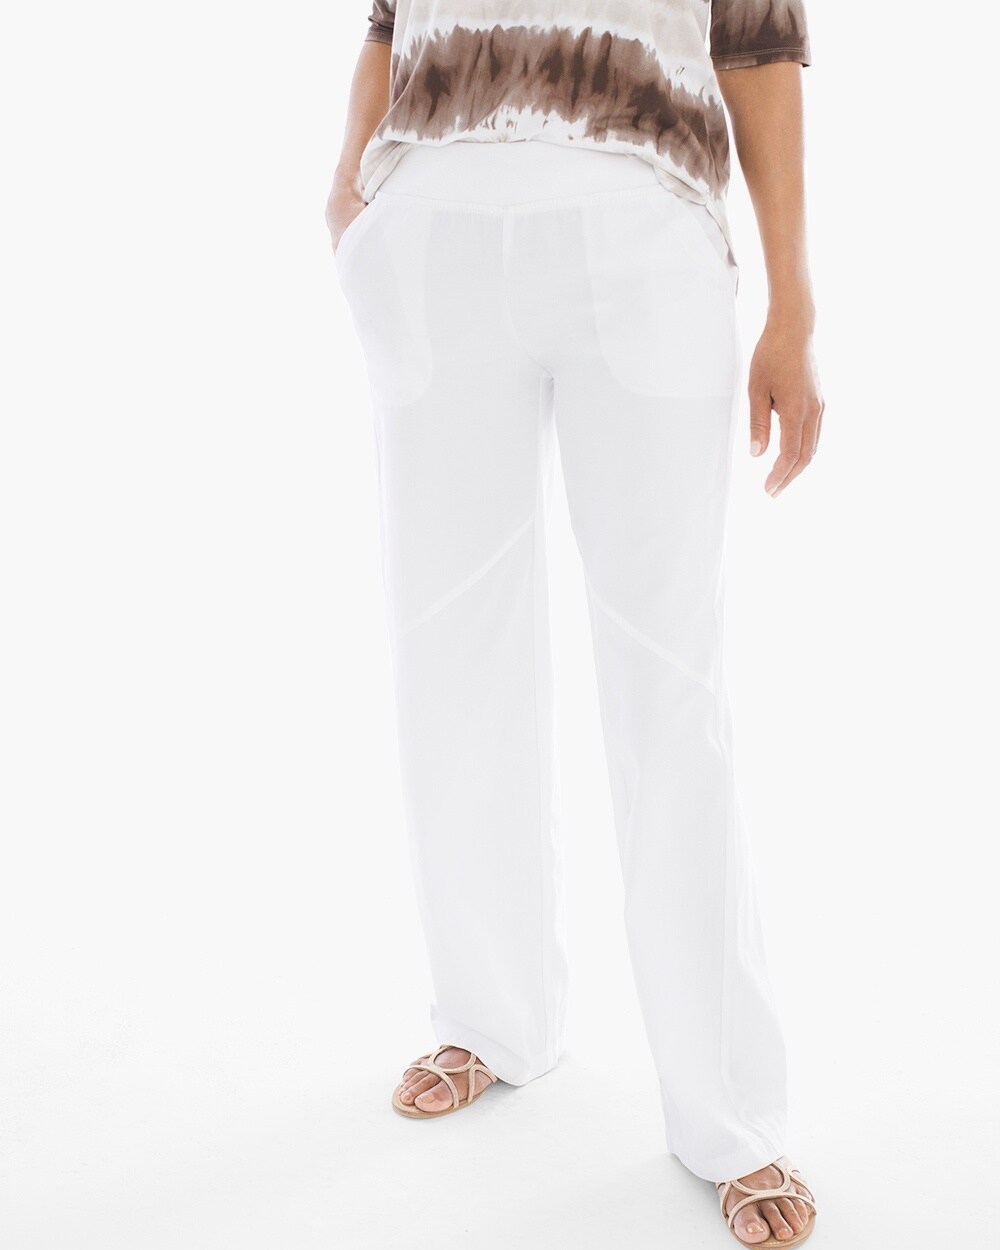 Zenergy Peggy Relaxed Pants